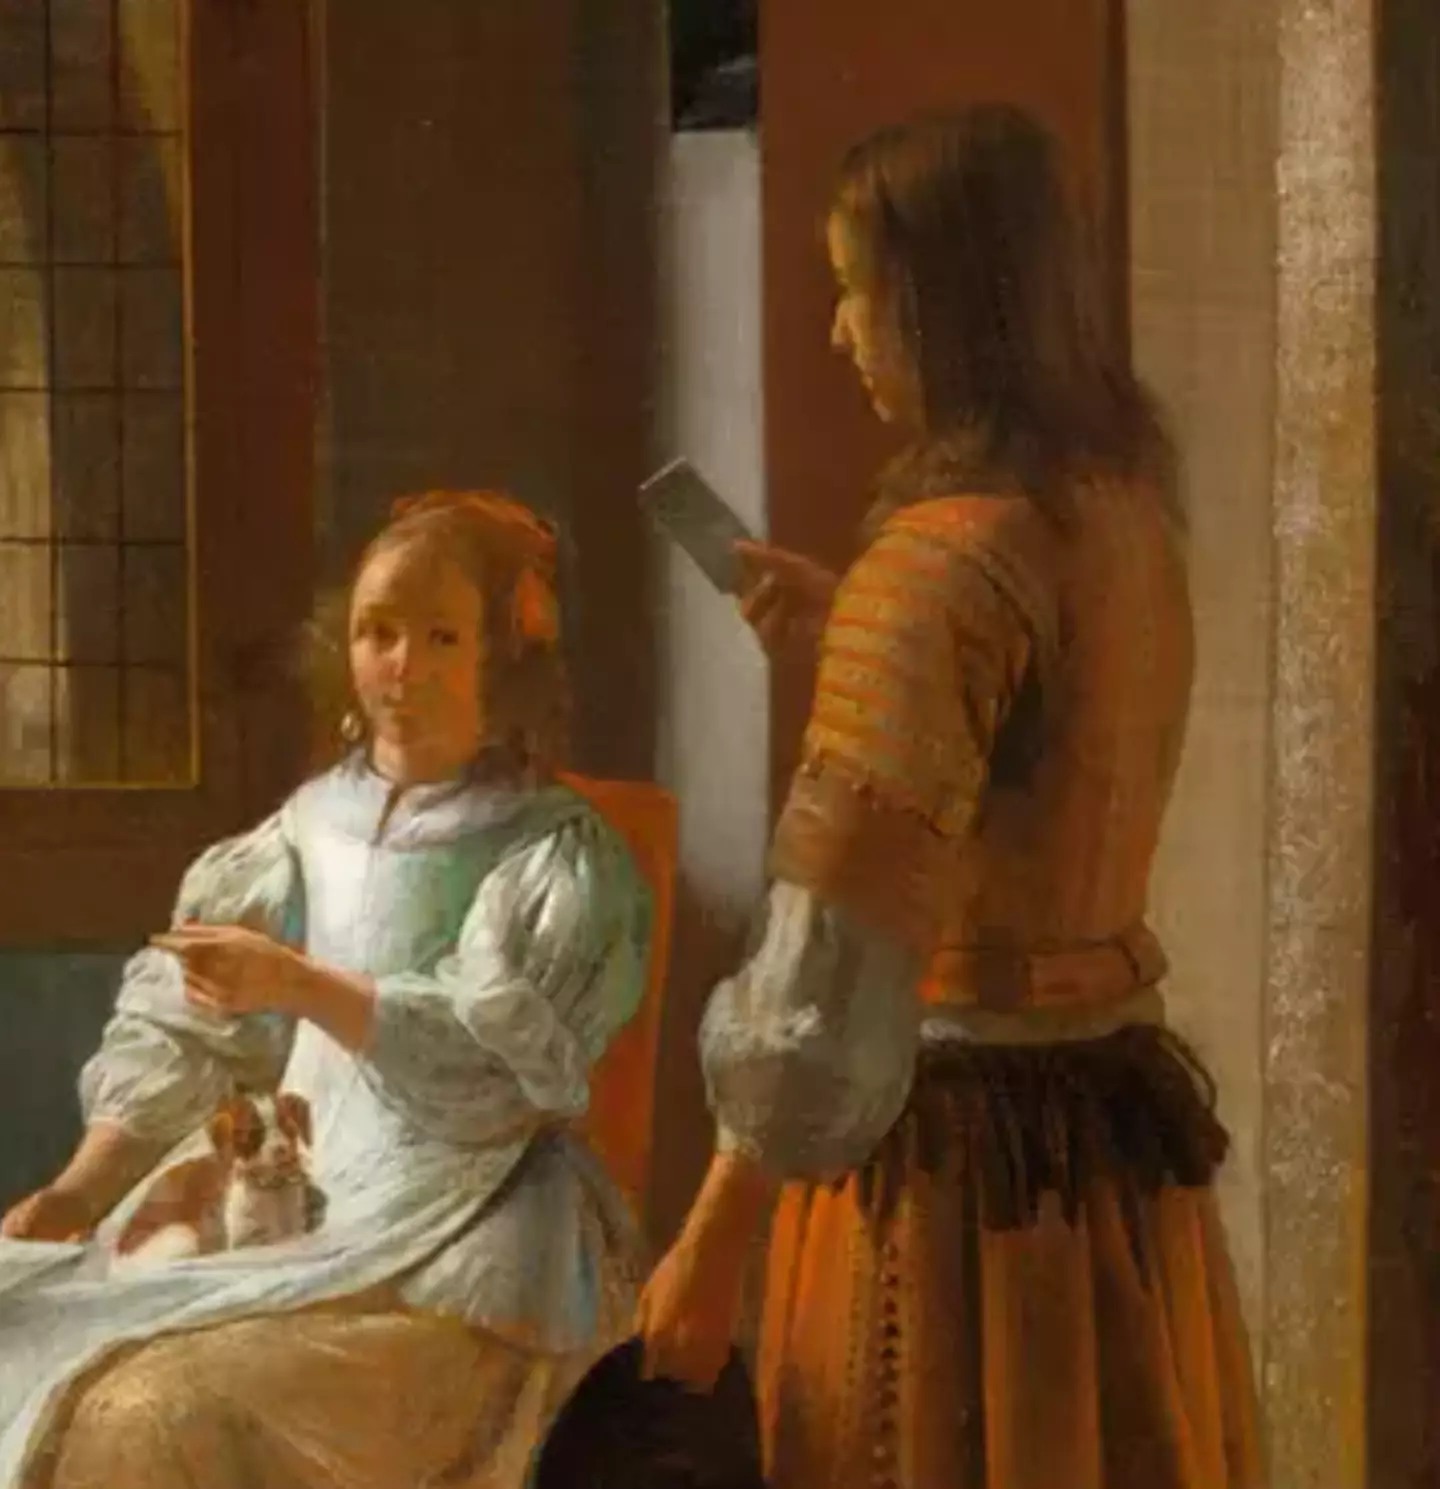 People have been left well and truly baffled after noticing an 'Apple phone' in a 350-year-old painting.